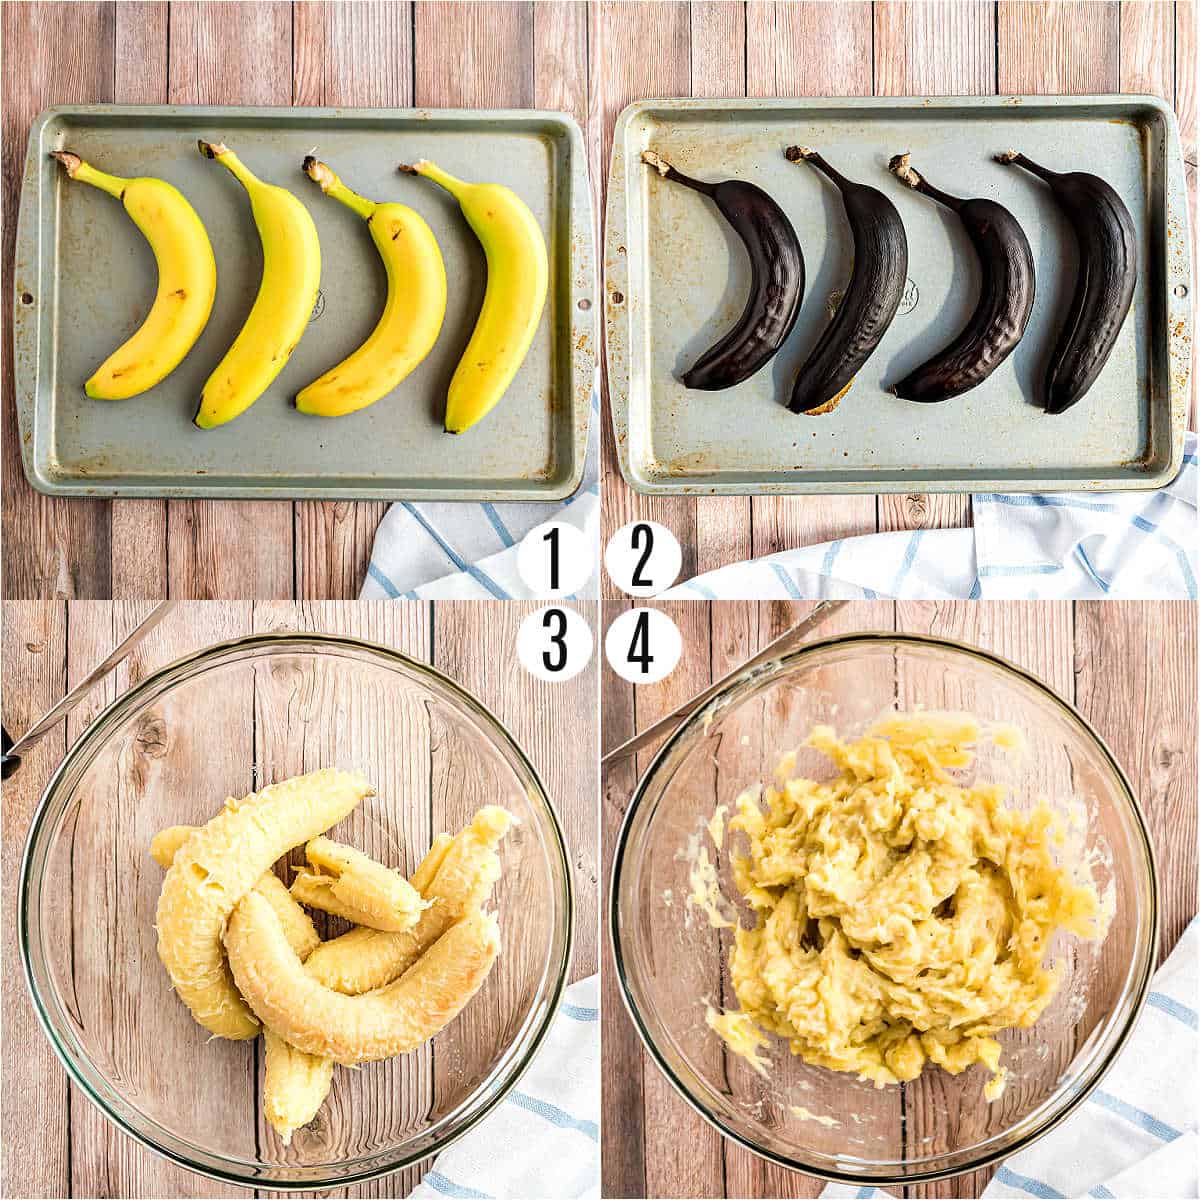 Step by step photos showing how to ripen bananas in the oven.